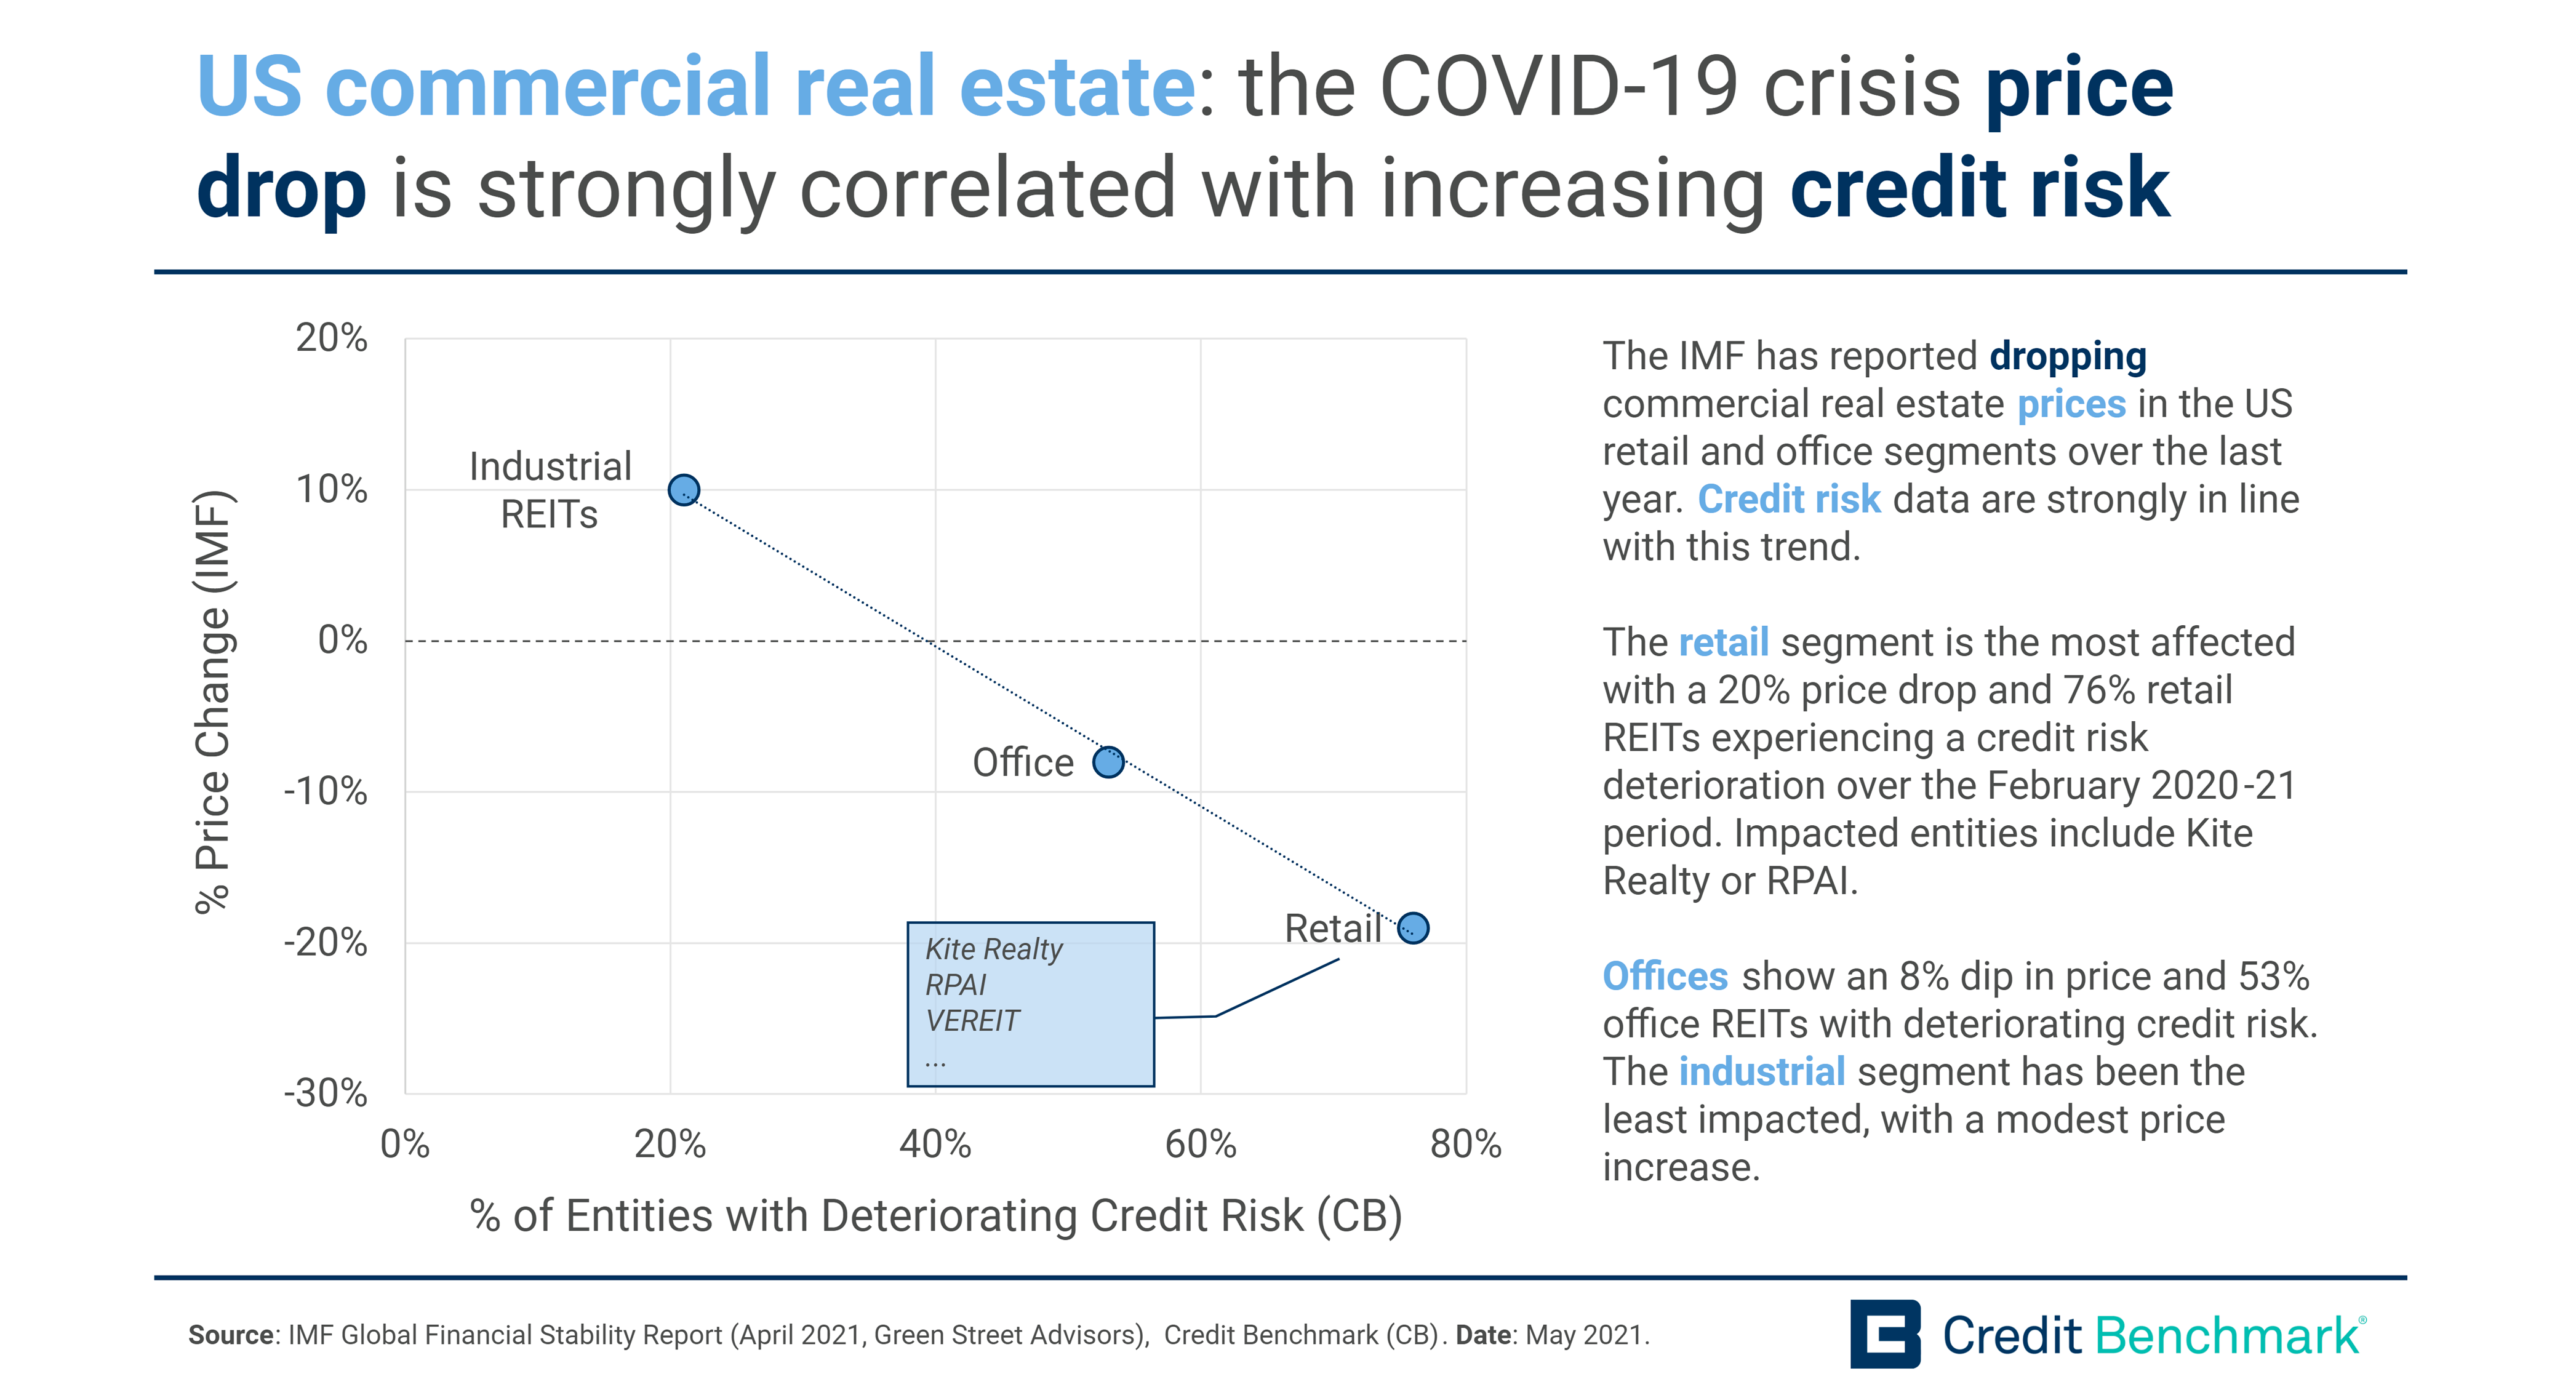 US commercial real estate : the COVID-19 crisis price drop is strongly correlated with increasing credit risk